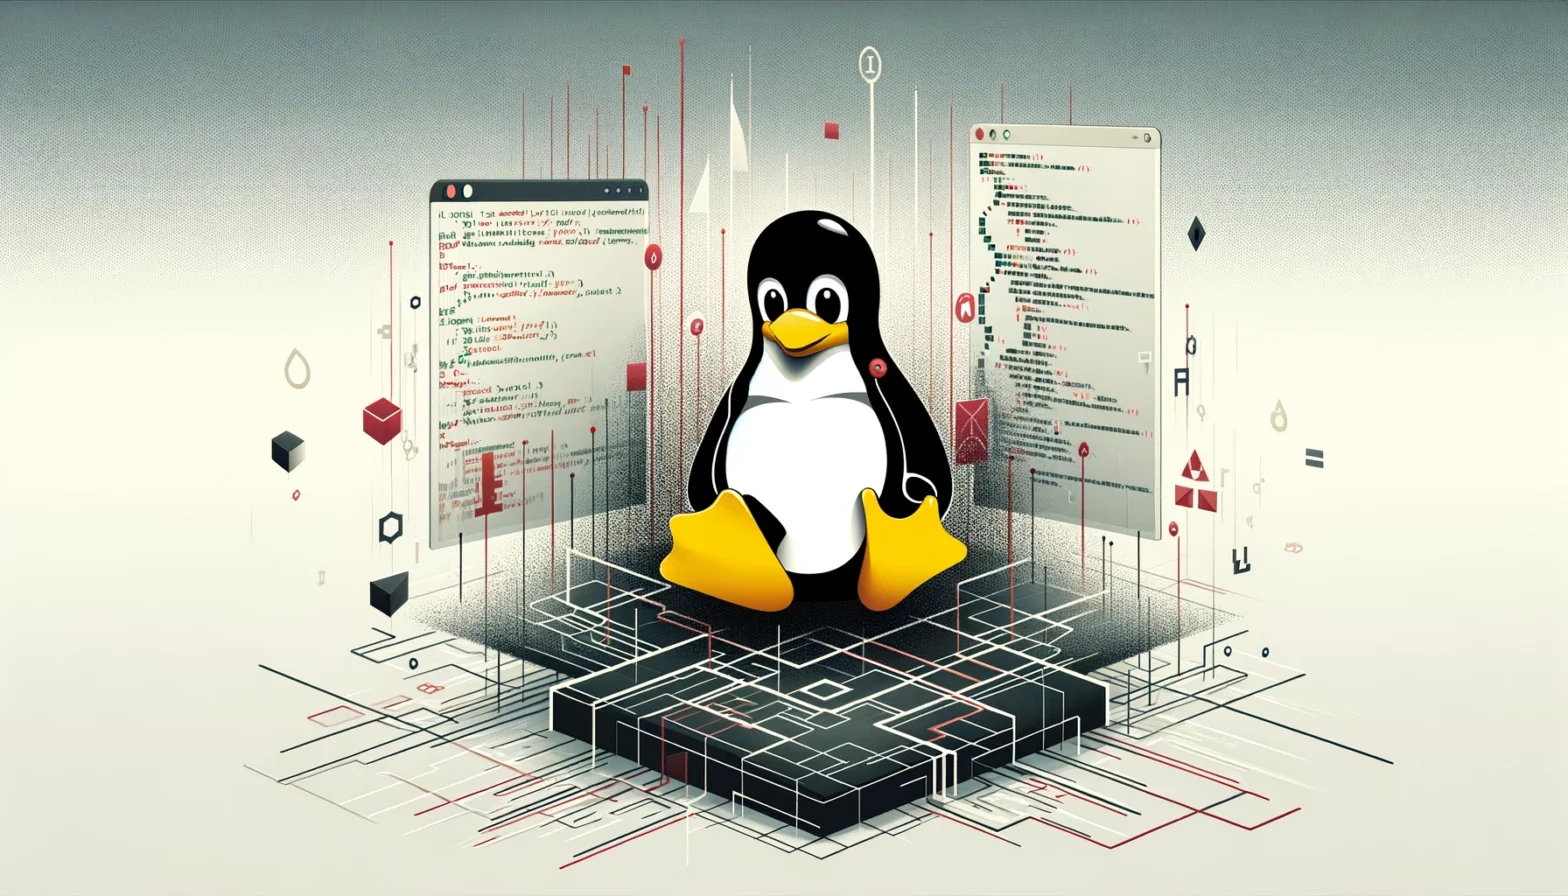 Critical Boot Loader Vulnerability in Shim Puts Linux Systems in Danger